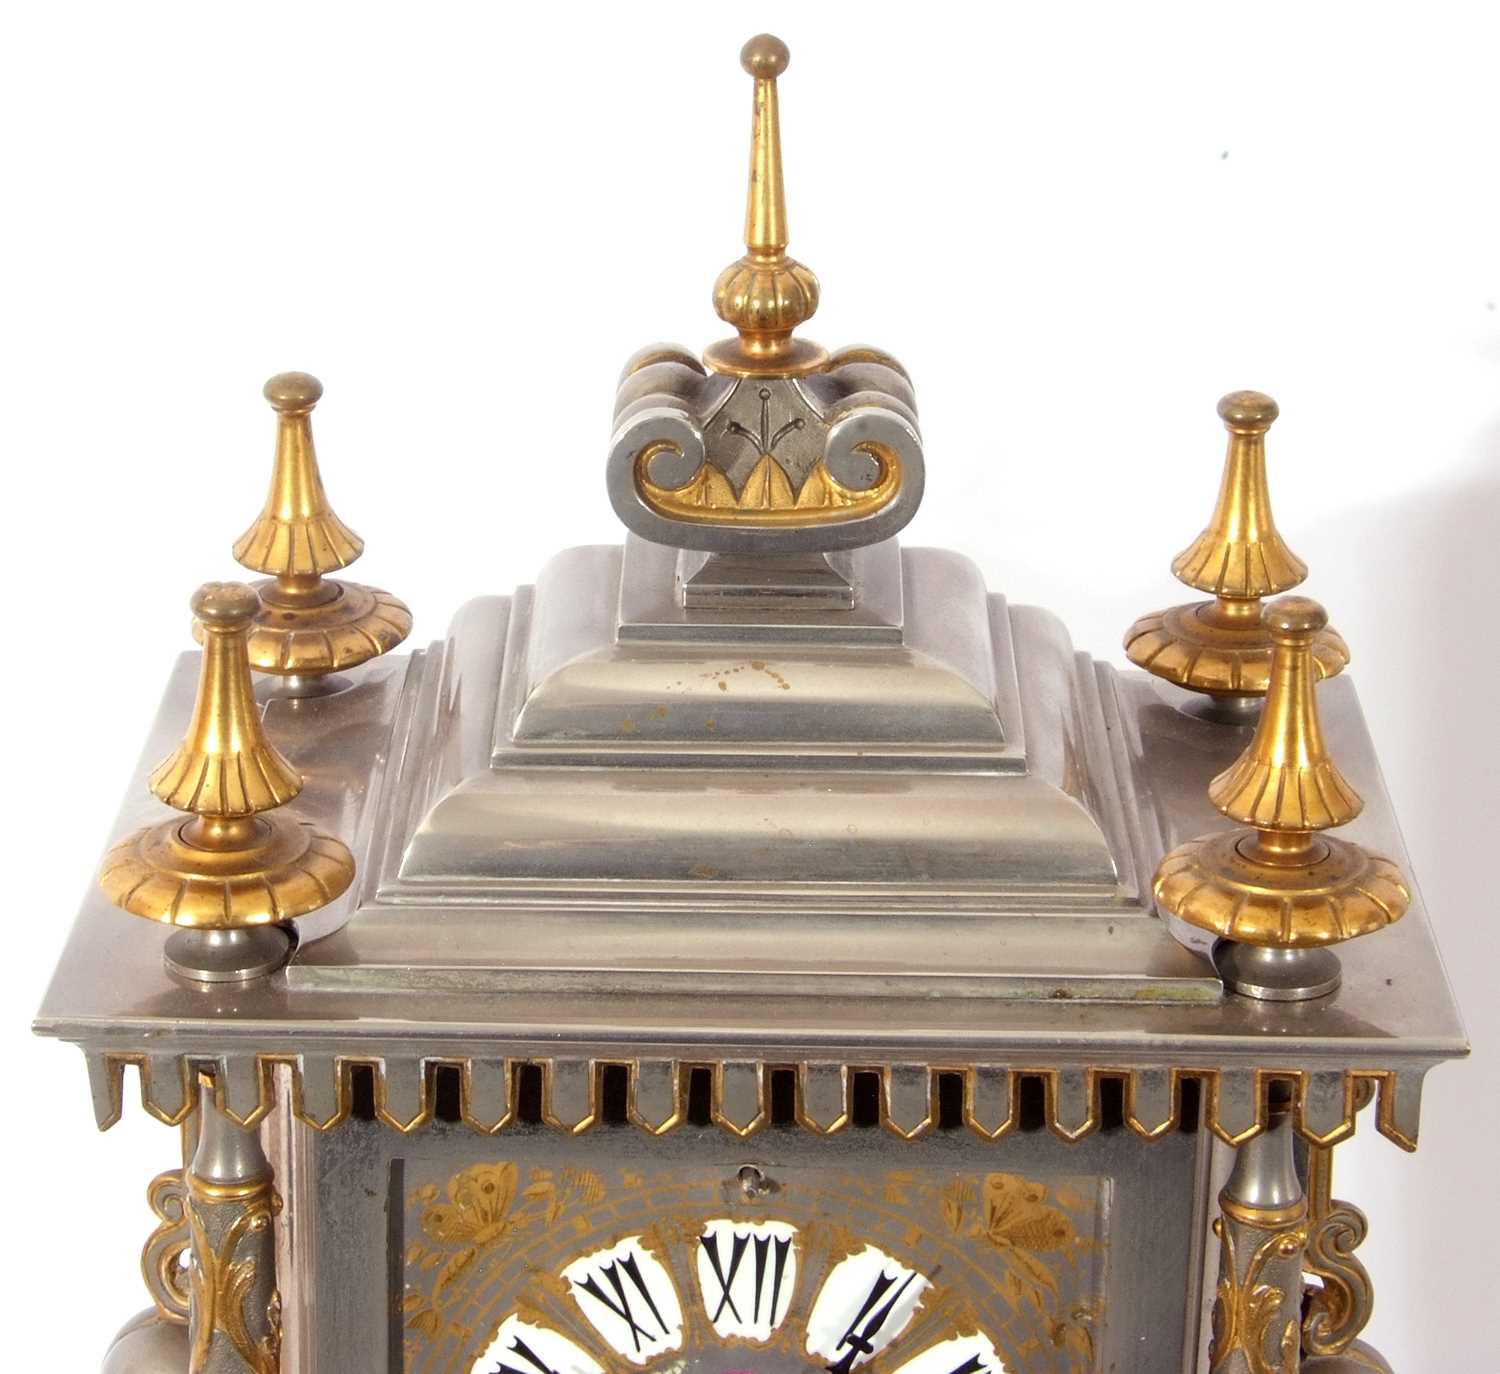 Good quality late 19th/early 20th century mantel clock, set in architectural metal and gilt - Image 11 of 11